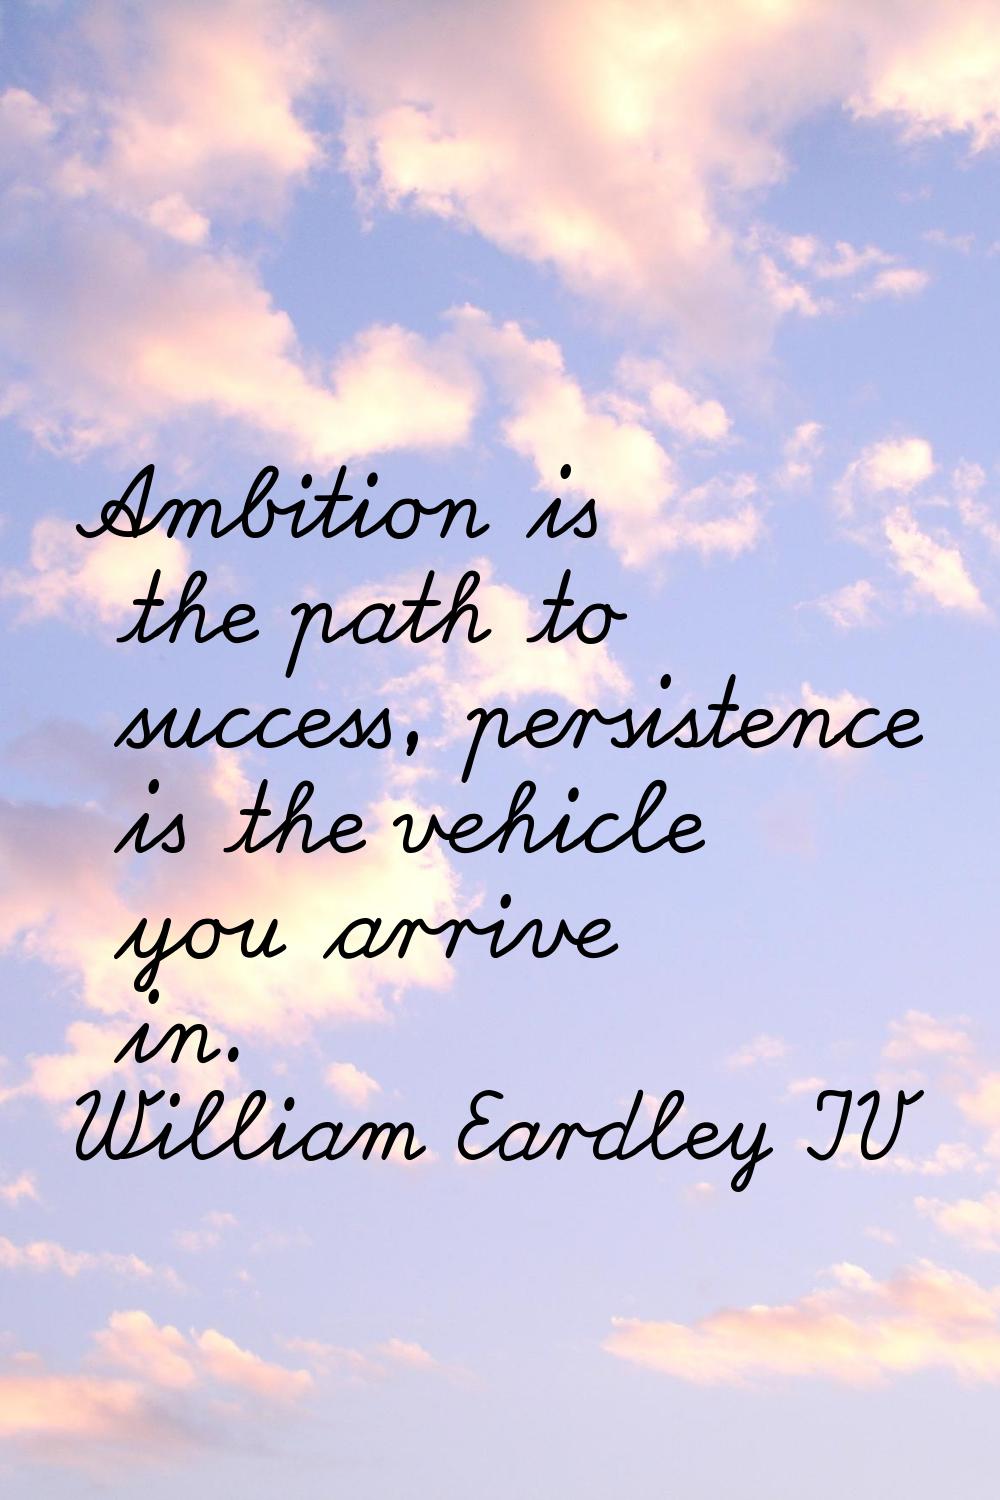 Ambition is the path to success, persistence is the vehicle you arrive in.